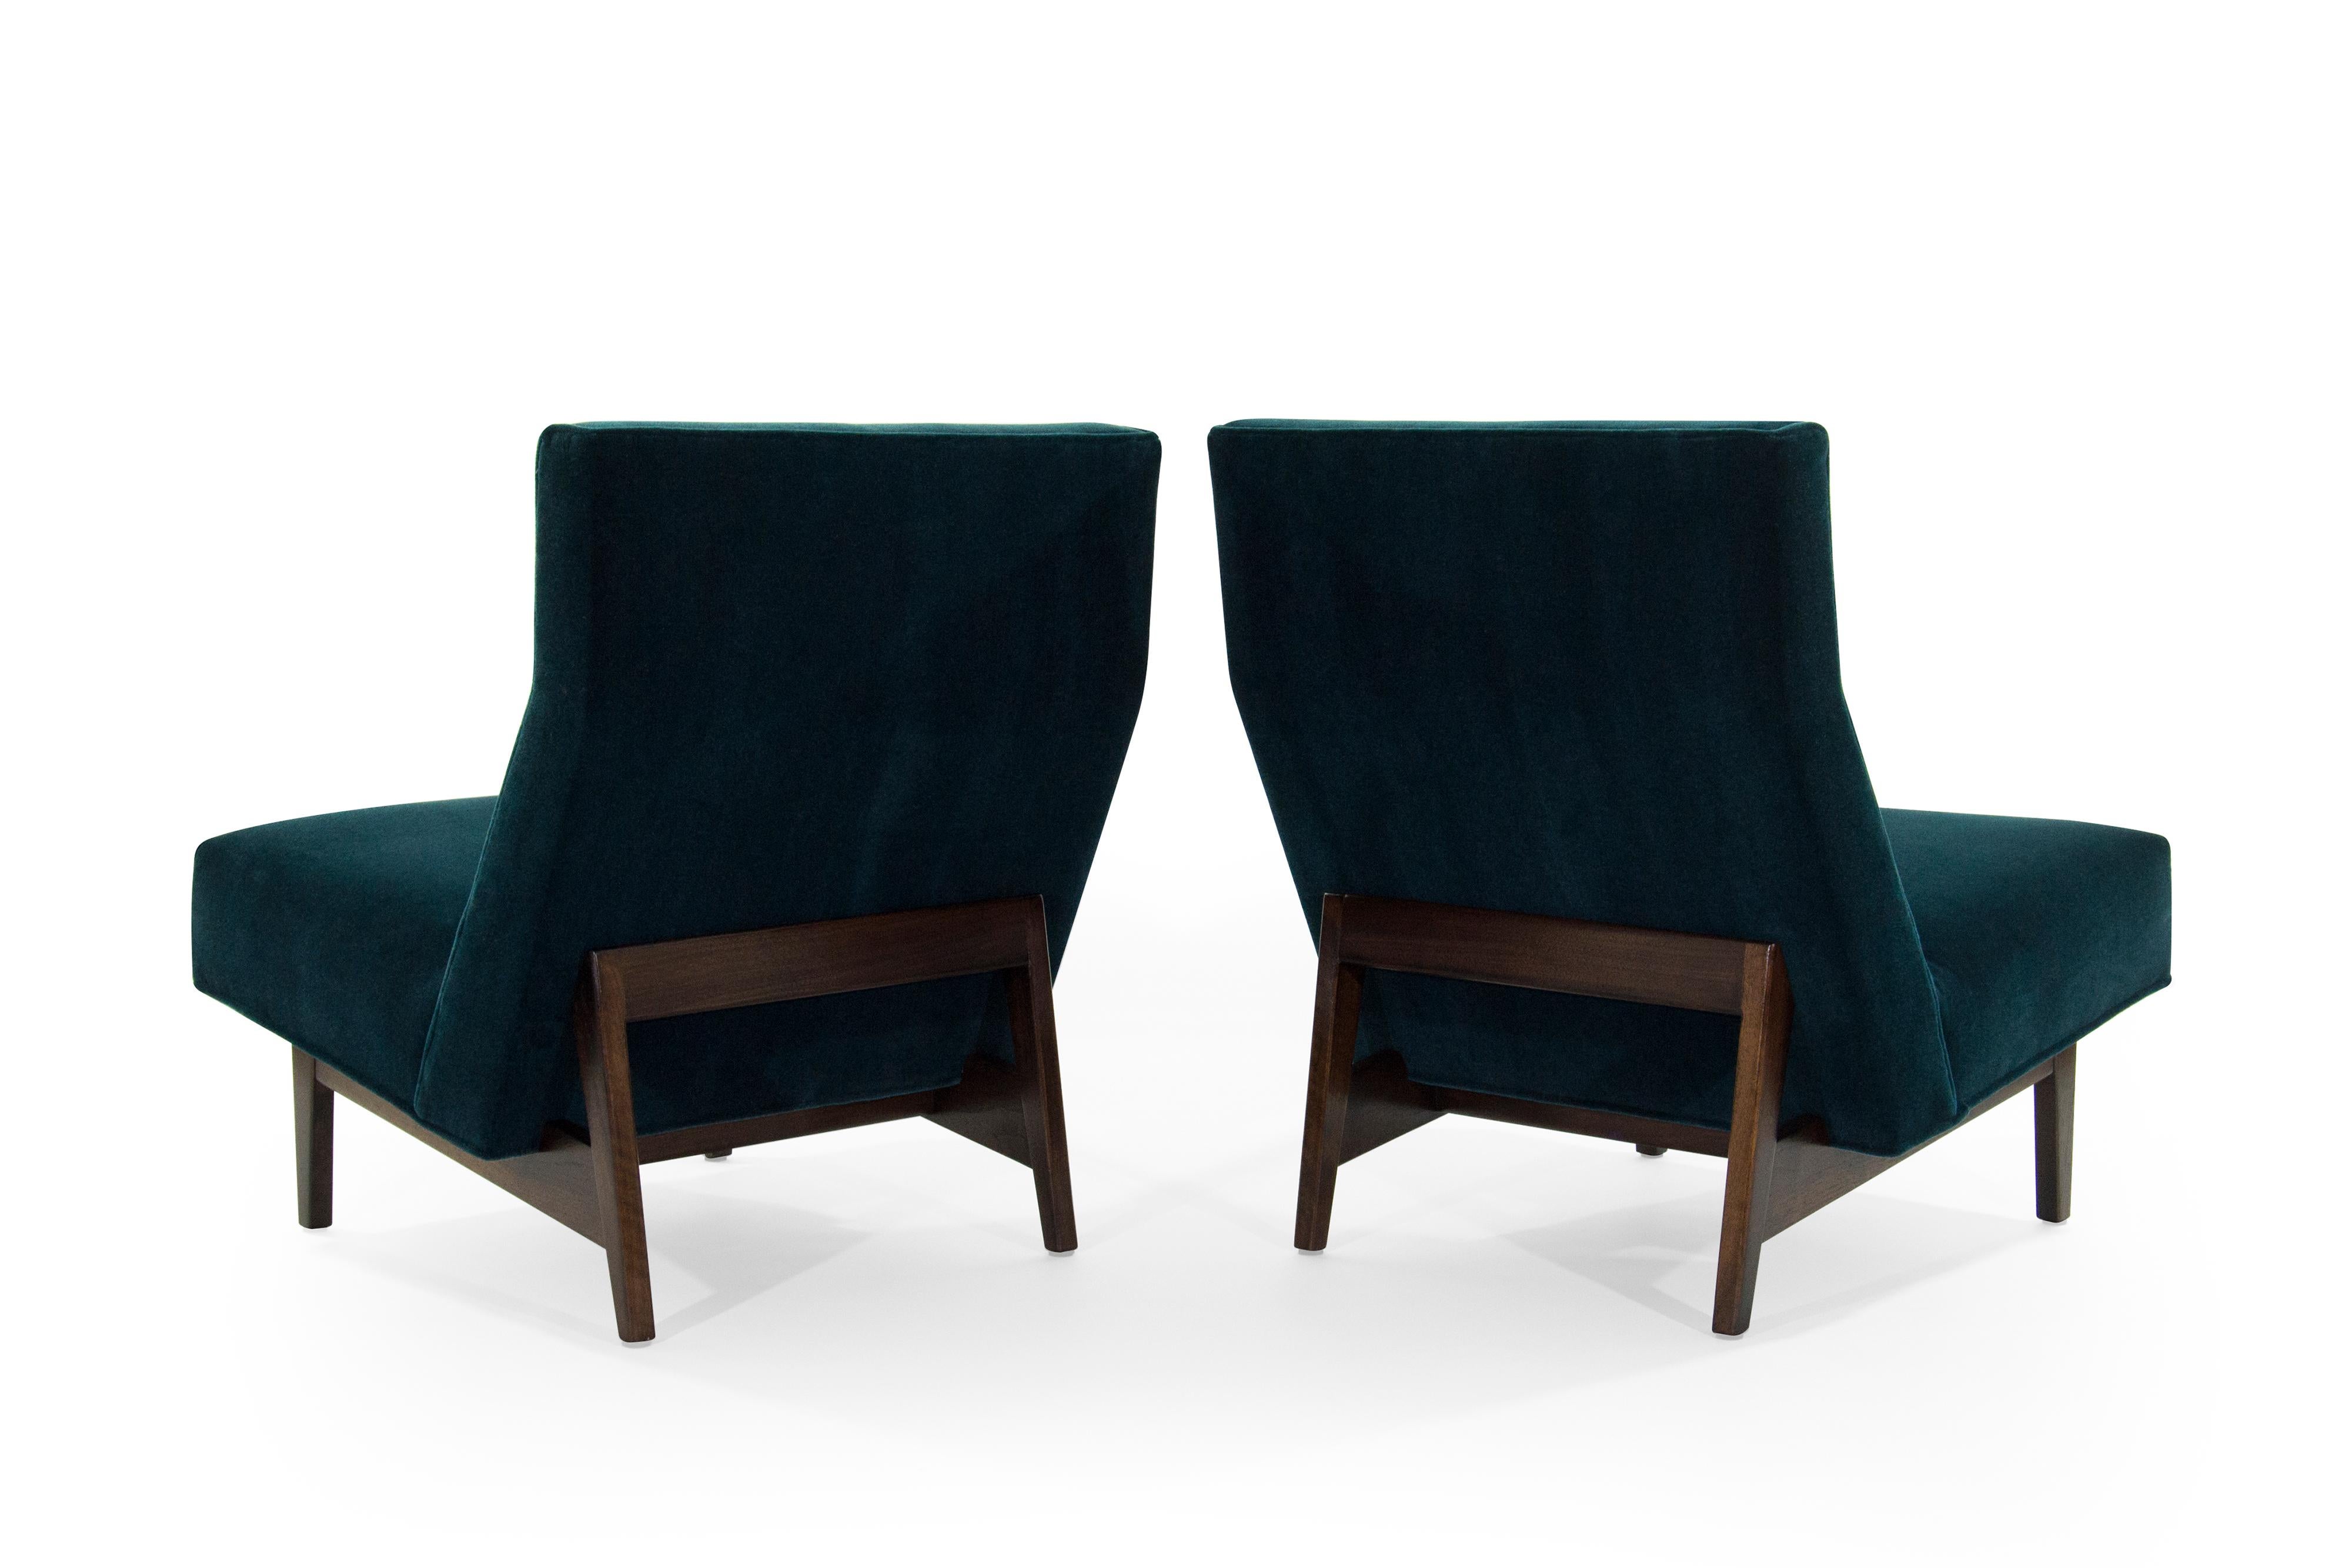 American Classic Slipper Chairs by Jens Risom in Teal Mohair, circa 1950s